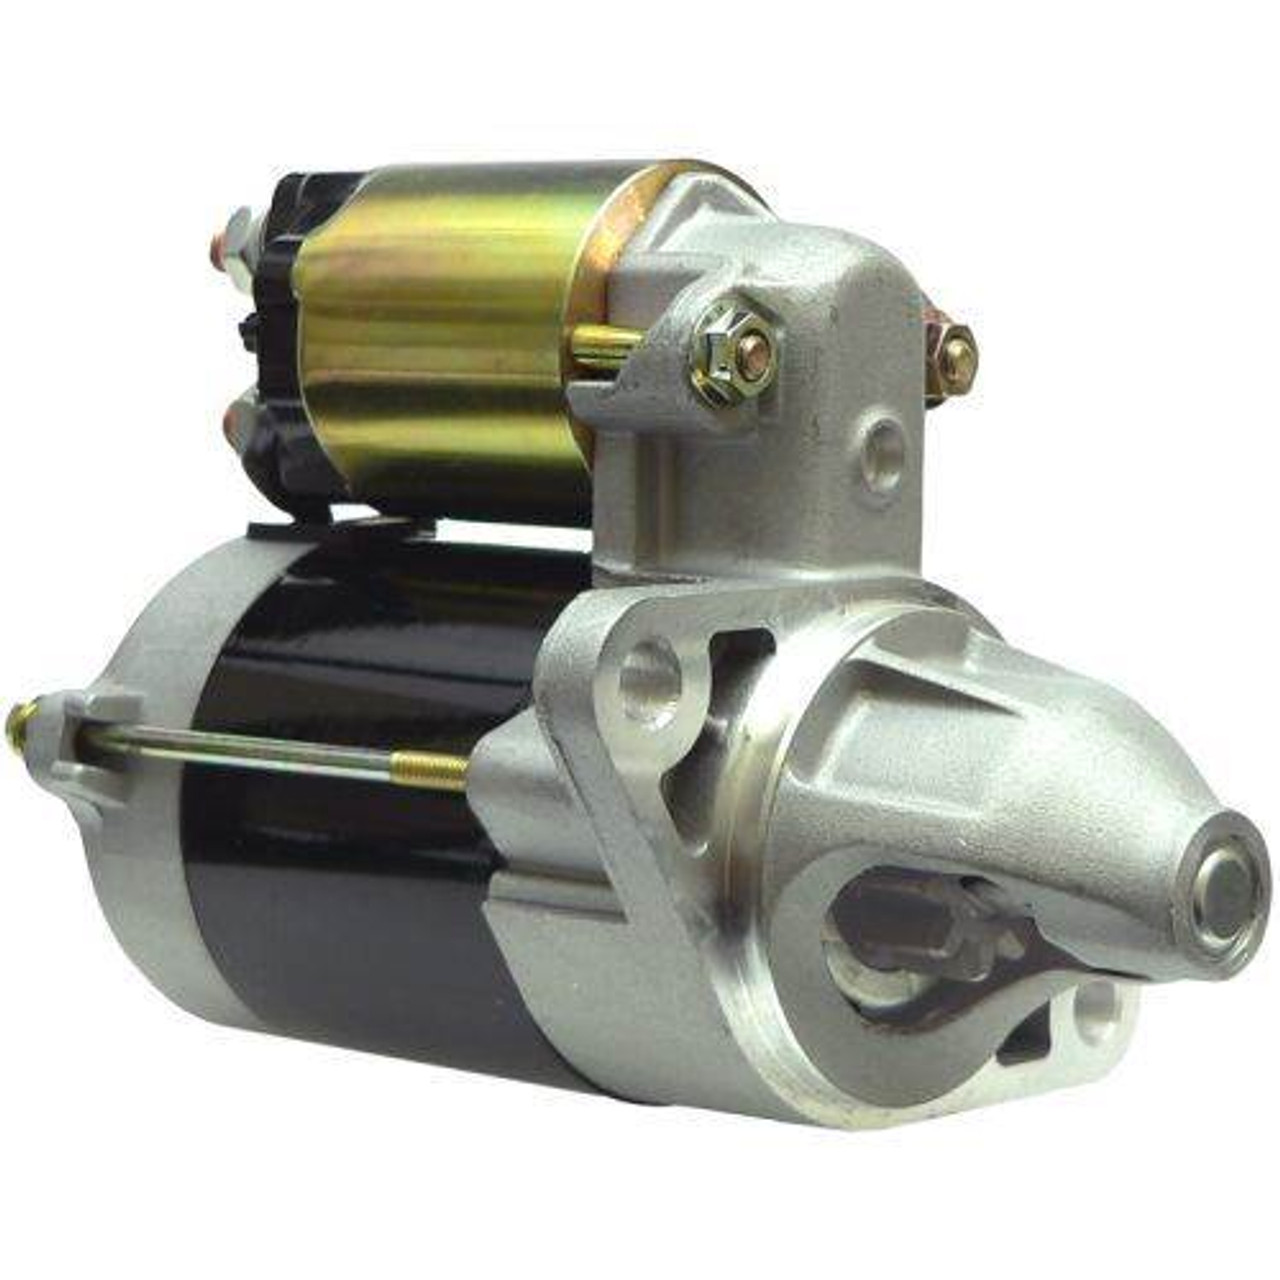 Bombardier Can-Am Utility Vehicle Mas Starter 18404